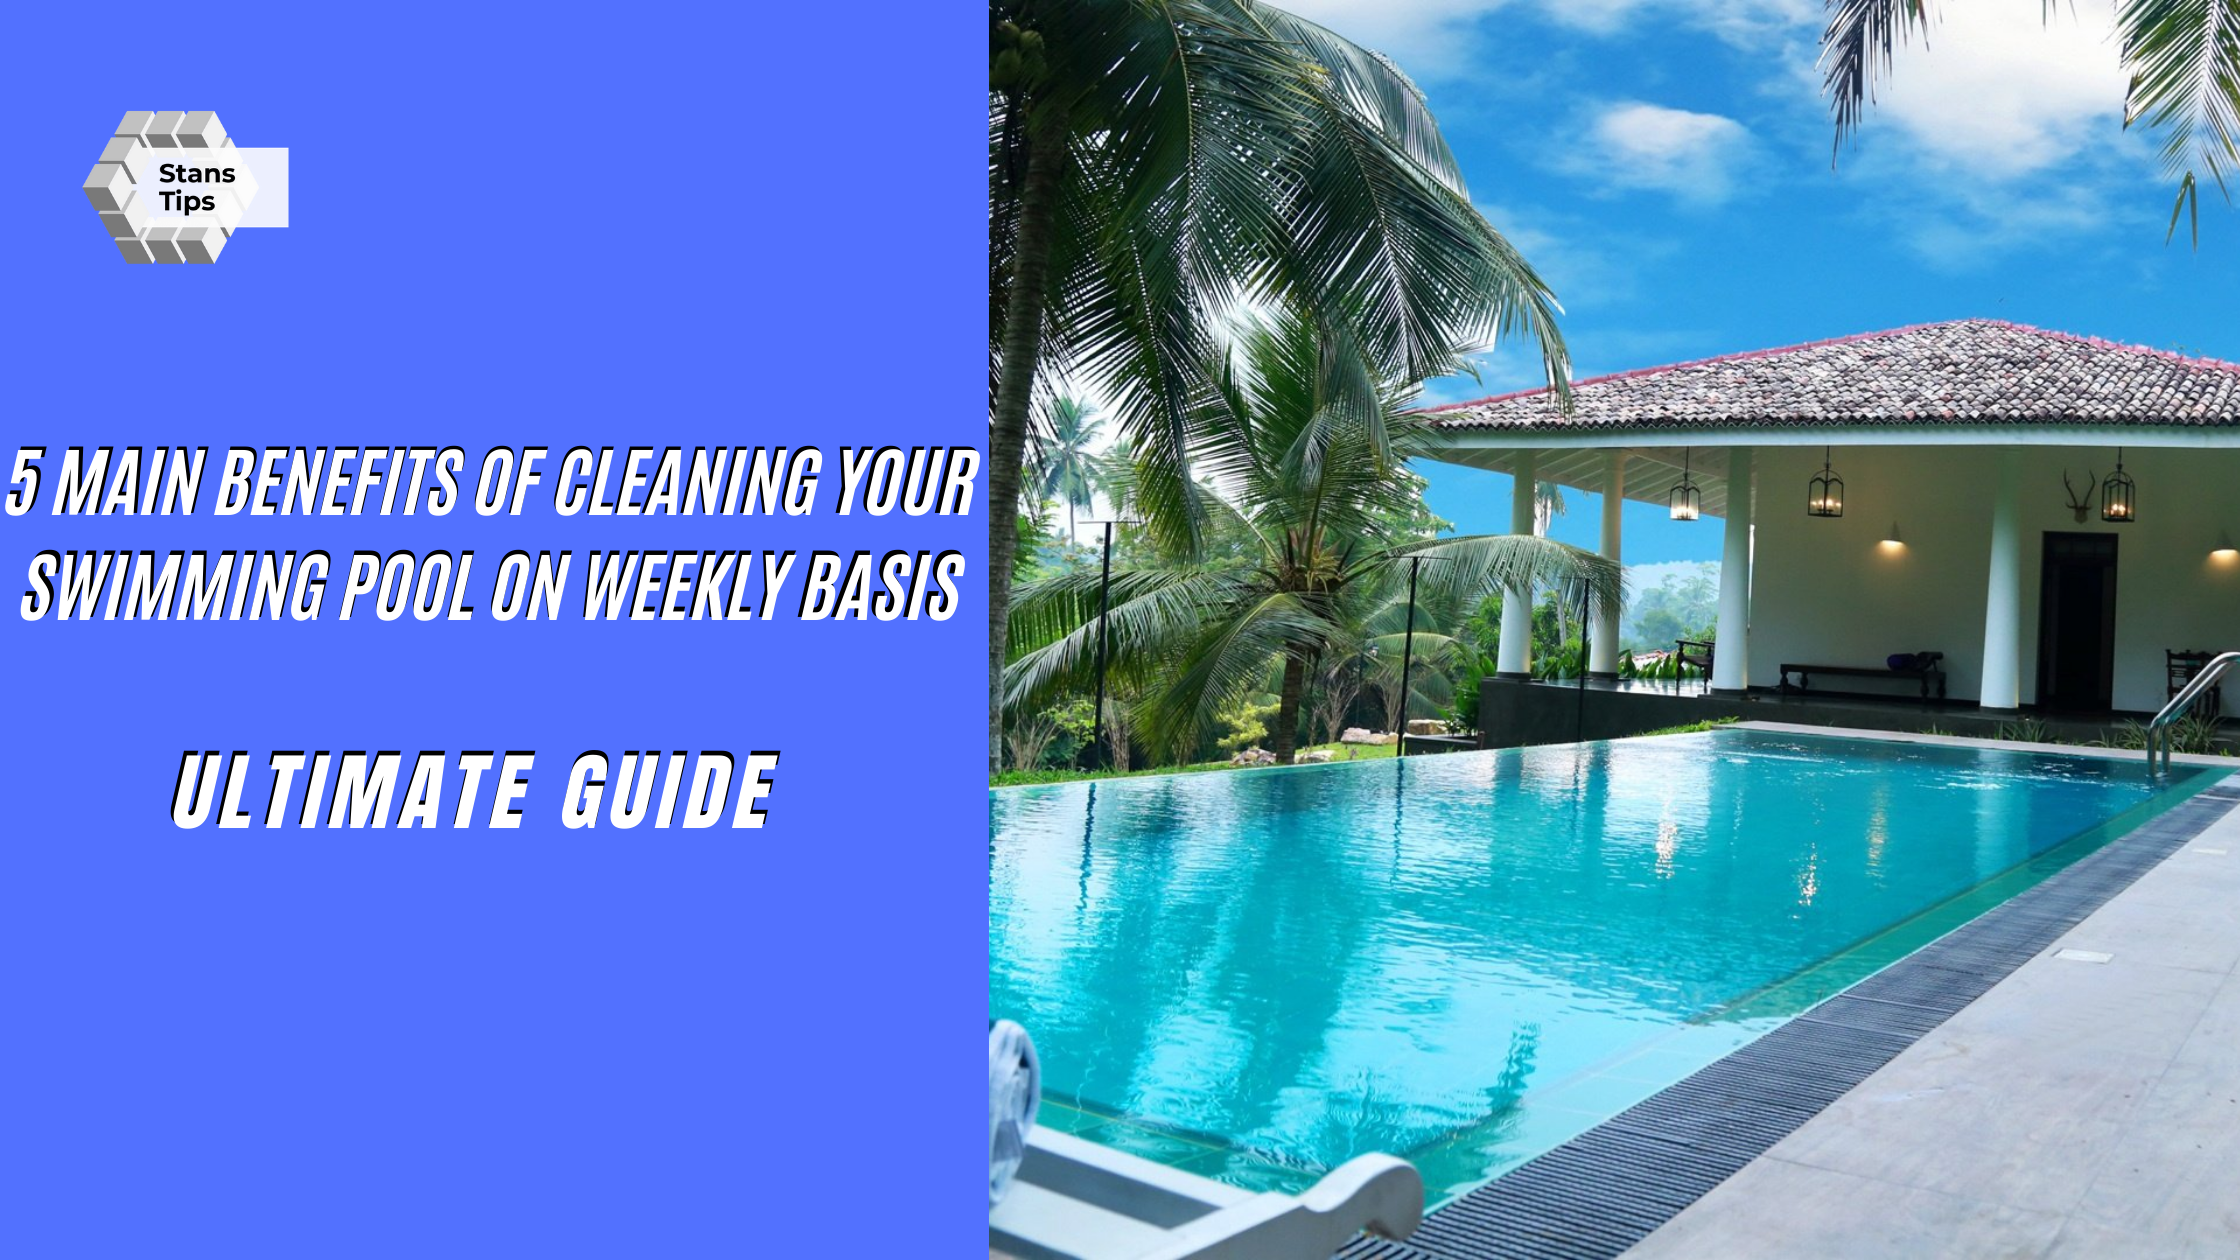 5 Main benefits of cleaning your swimming pool on weekly basis